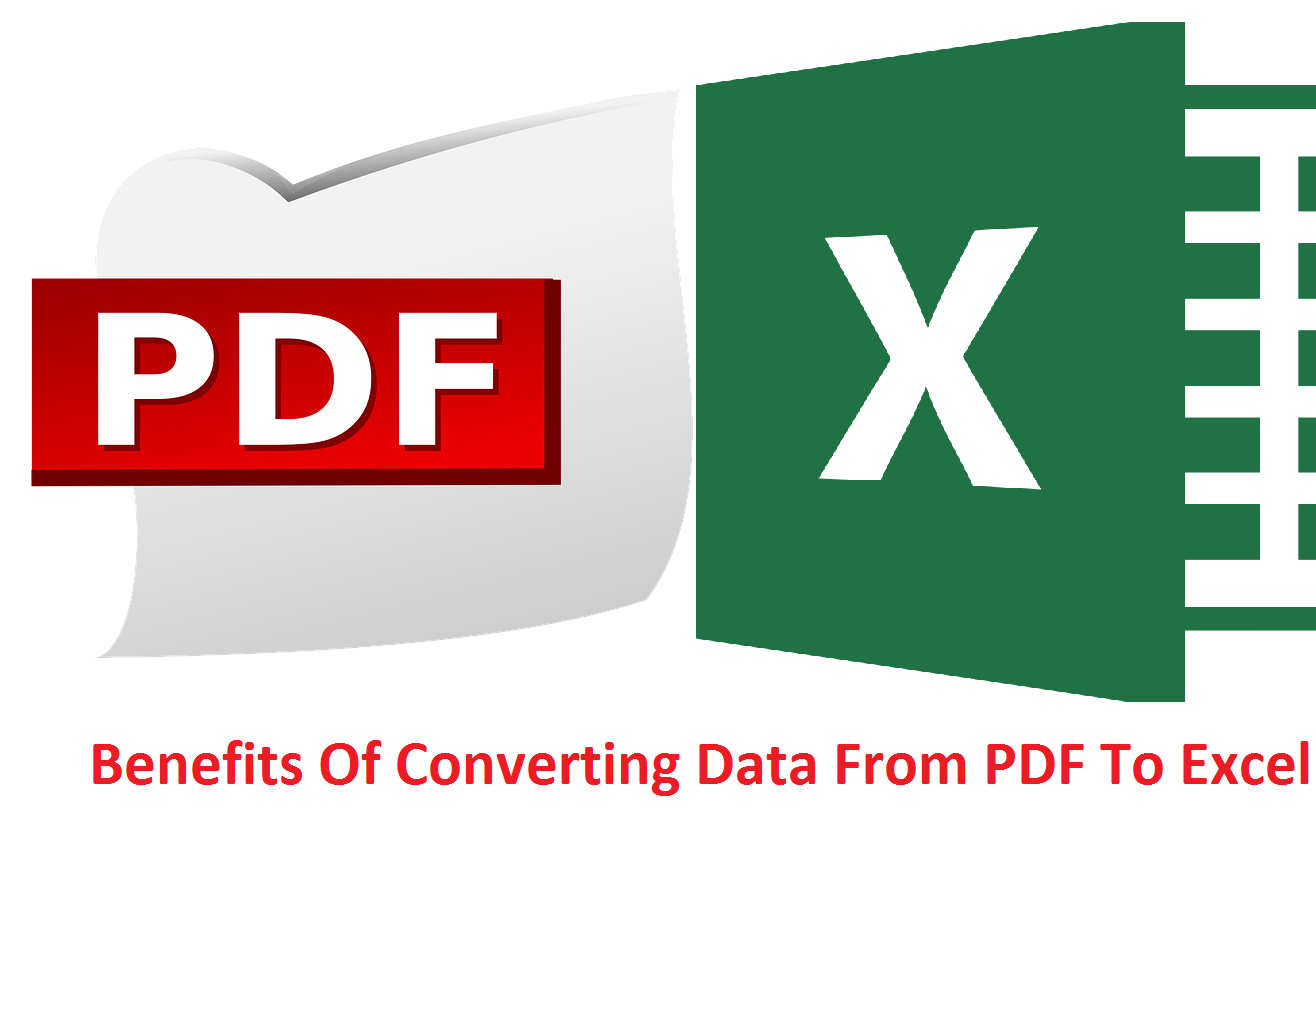 5 Benefits of Converting Data From PDF To Excel